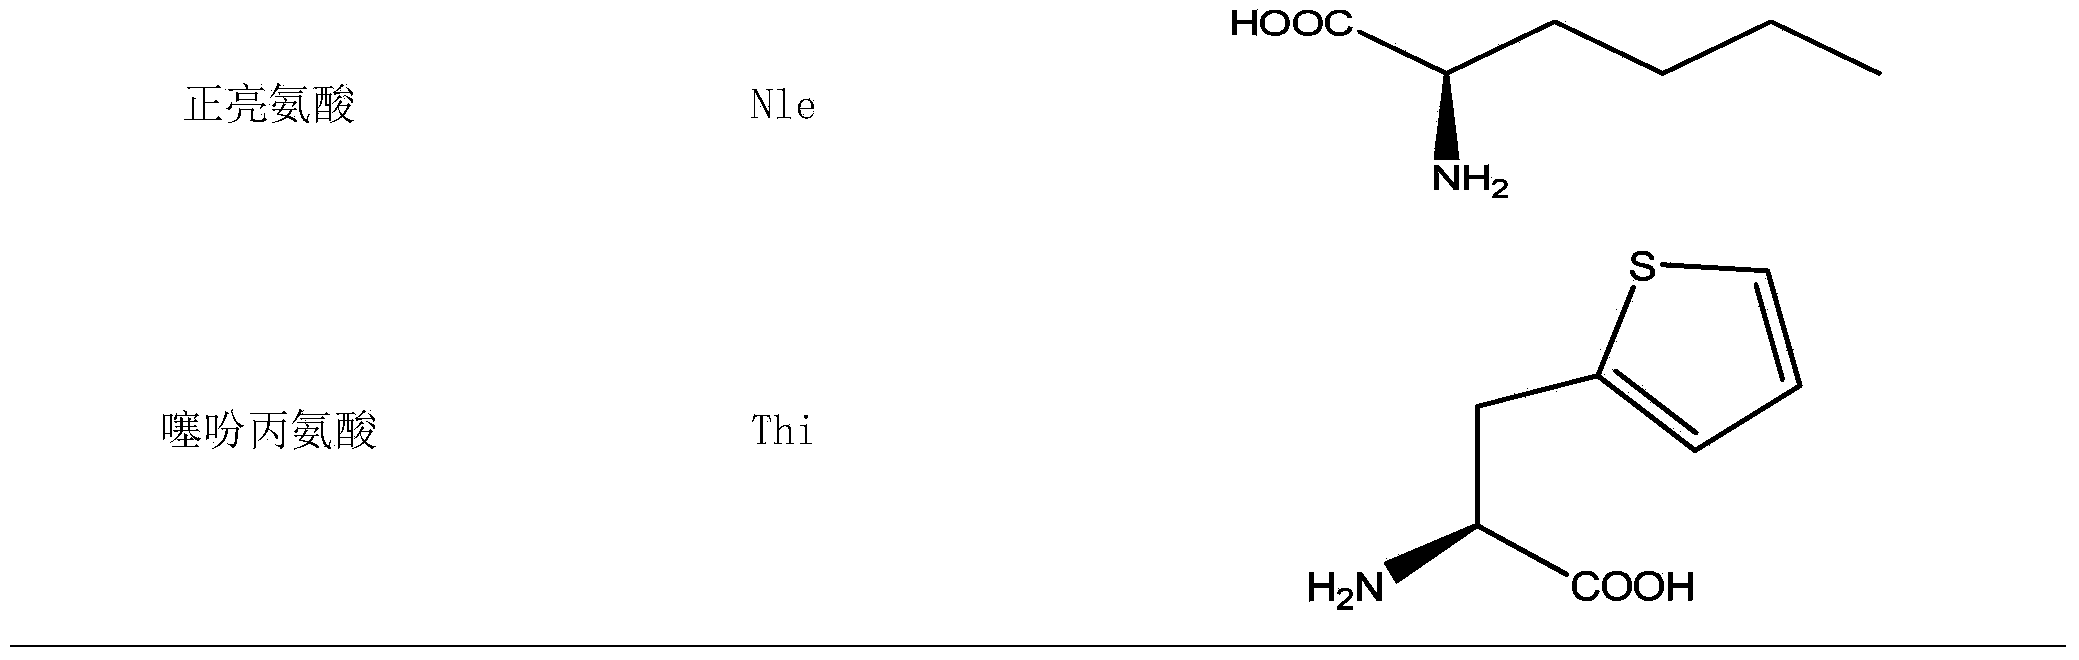 HRP5 analogues and preparation method thereof